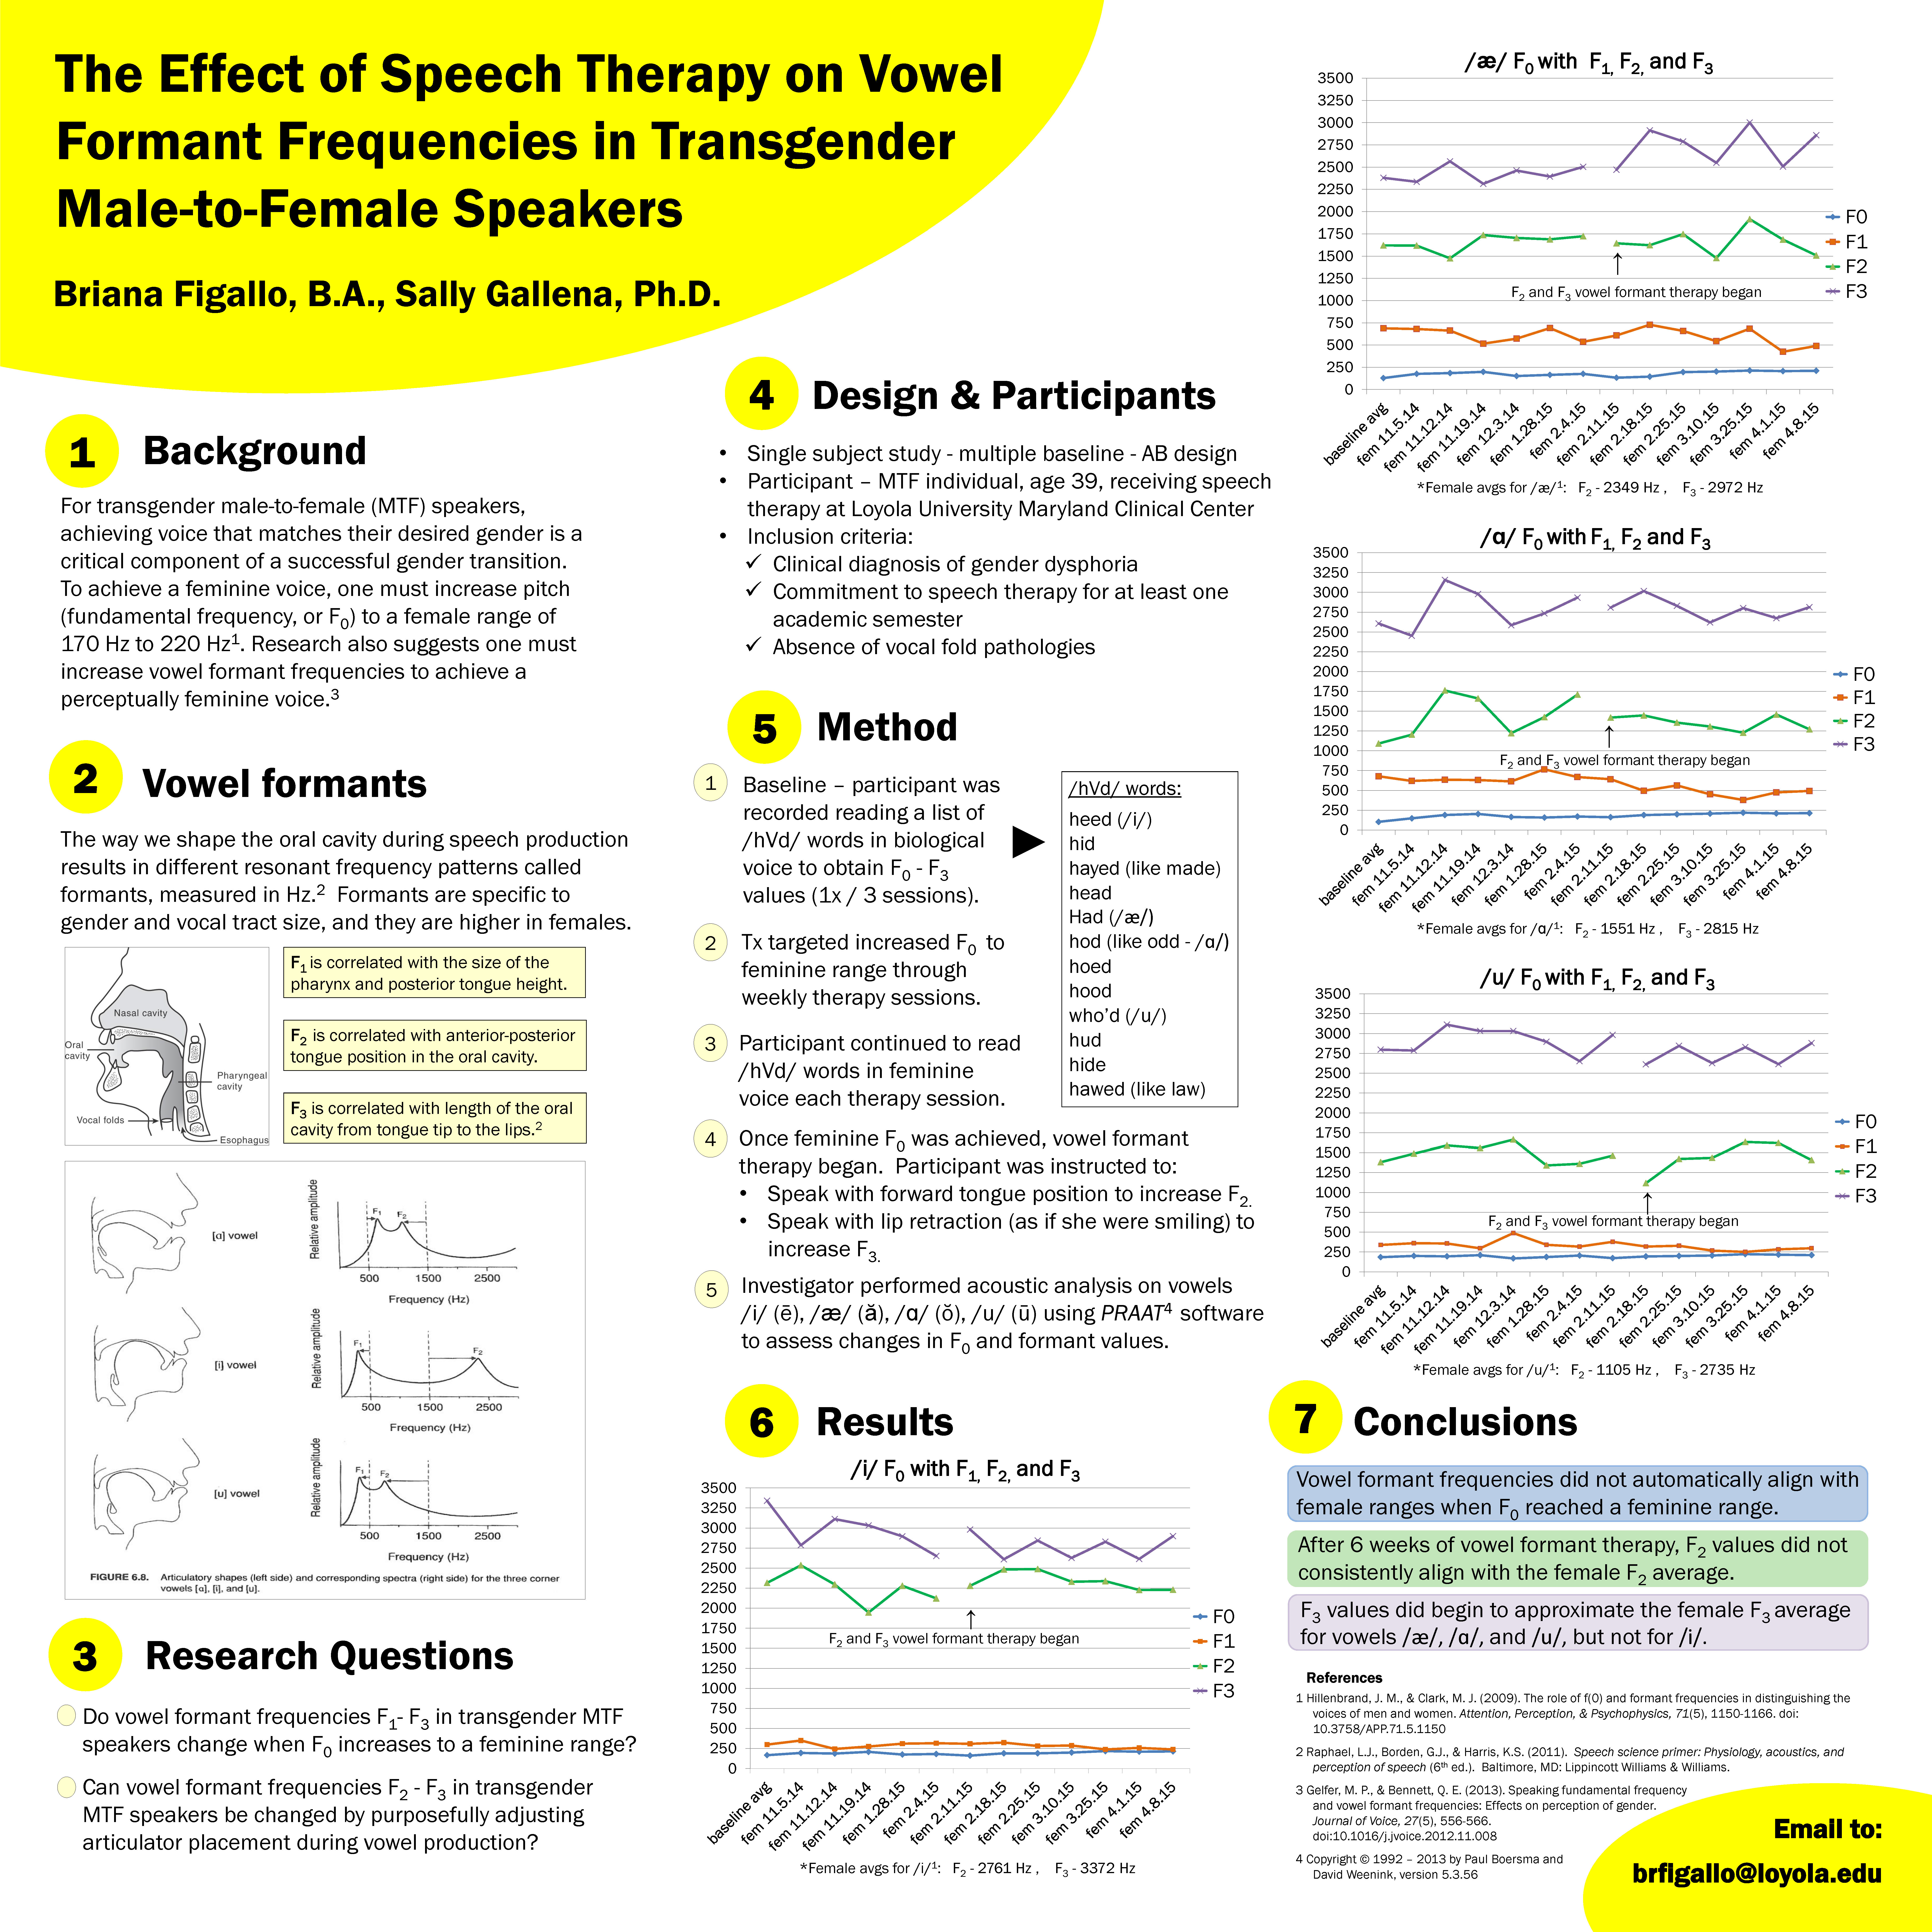 poster image:  The Effect of Speech Therapy on Vowel Formant Frequencies in Transgender Male-to-Female Speakers